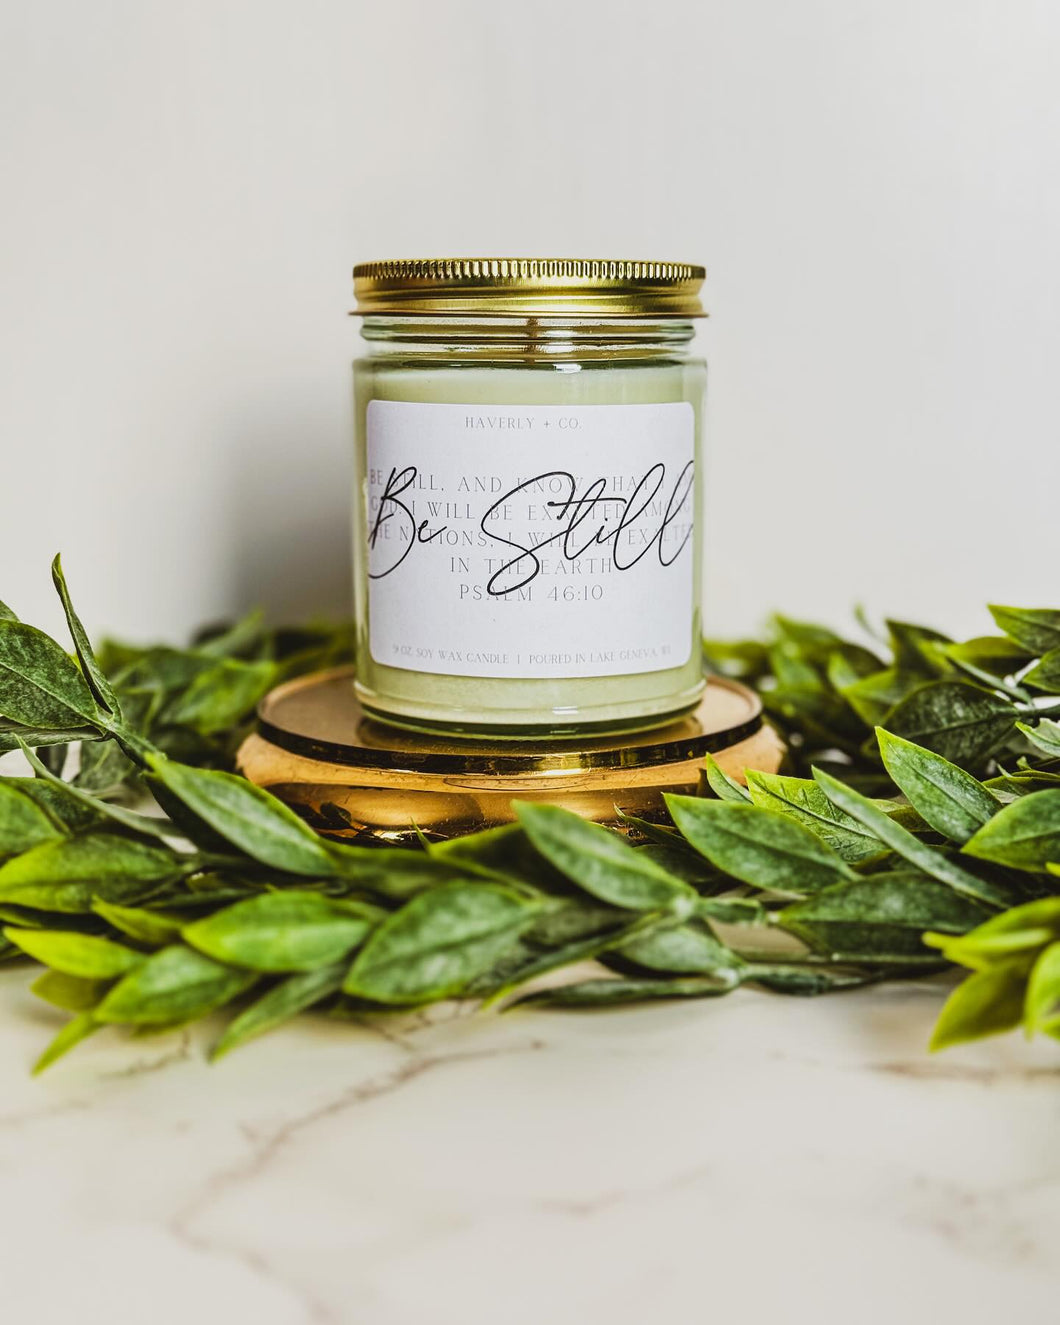 9 OZ. BE STILL PSALM 46:10 SOY CANDLE COLLECTION